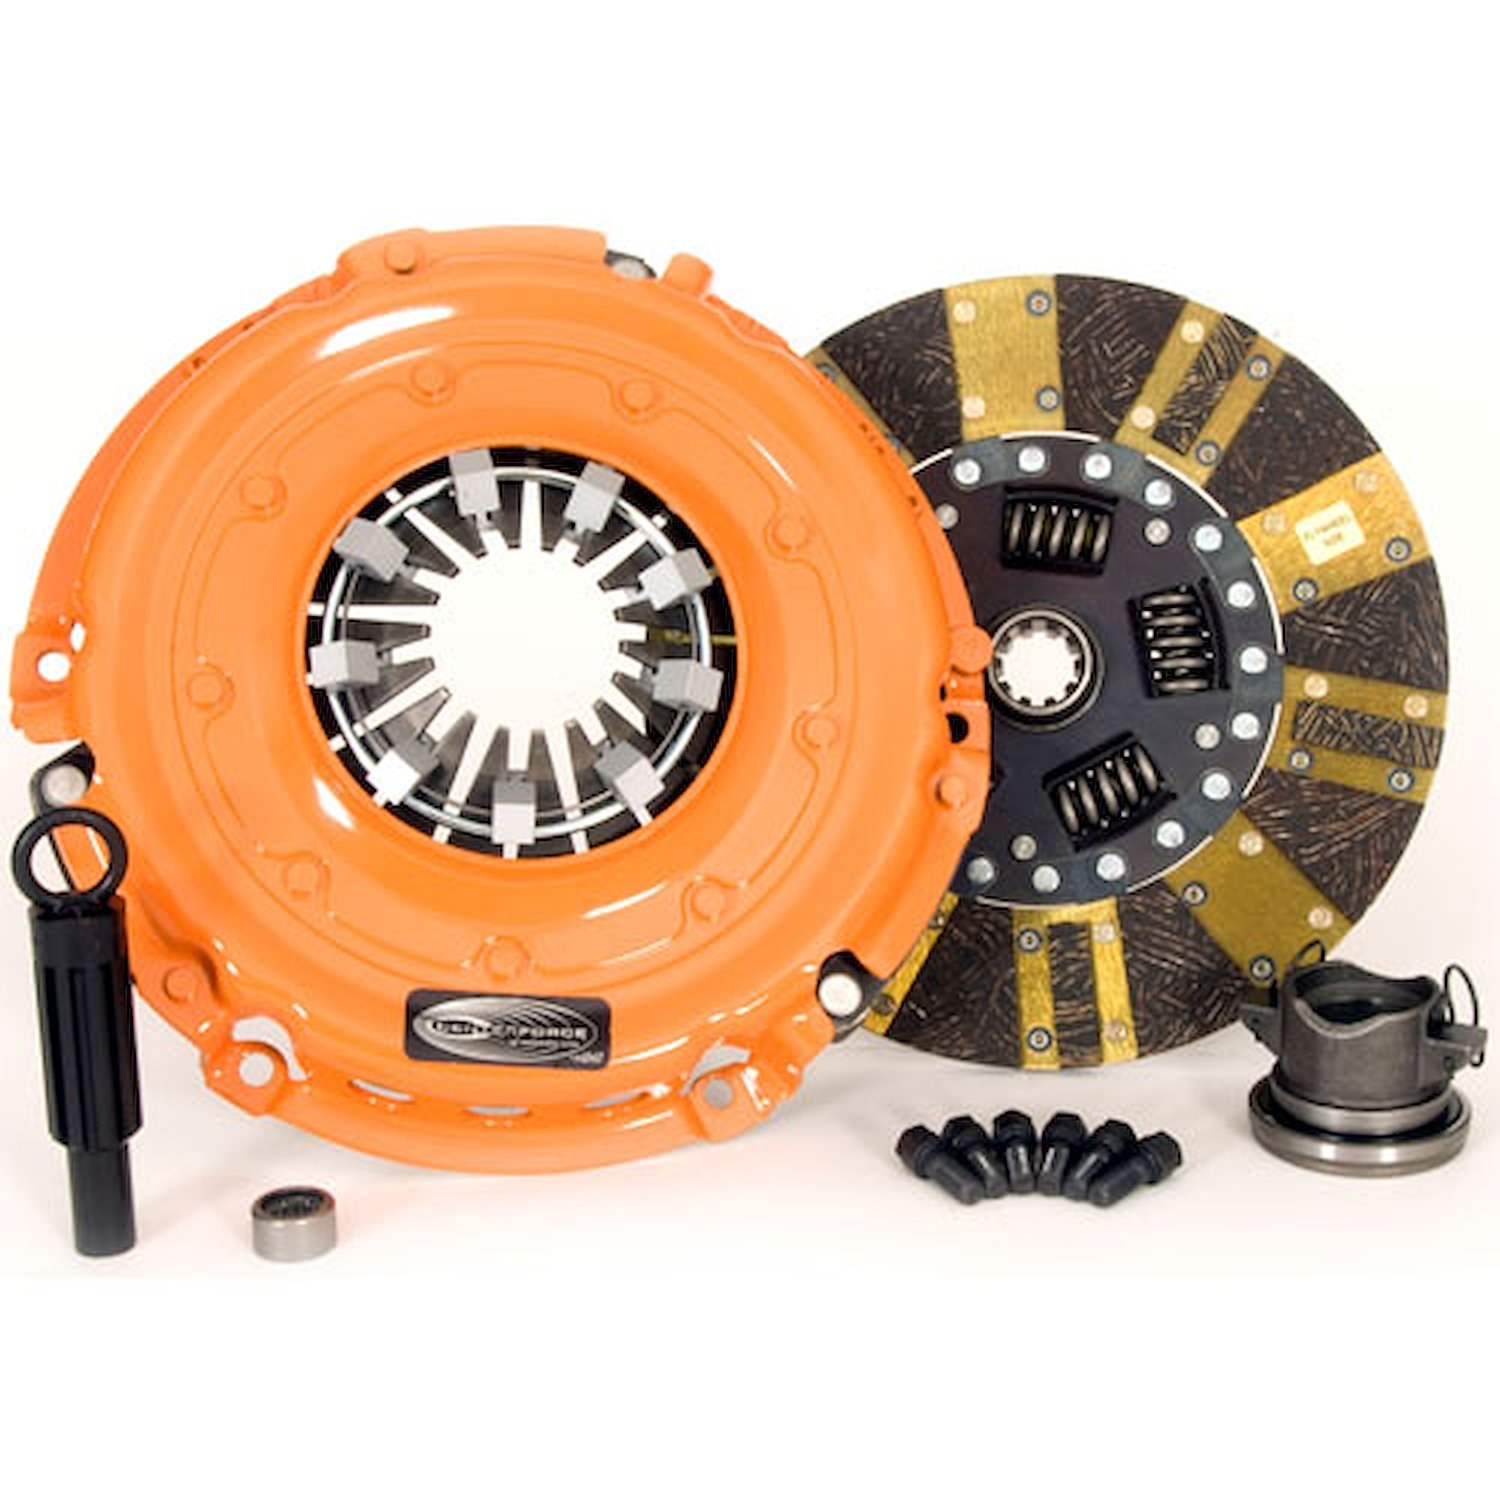 Dual Friction Clutch Kit Includes Pressure Plate, Disc, Pilot Bearing, Throw Out Bearing, Alignment Tool, Pressure Plate Bolts